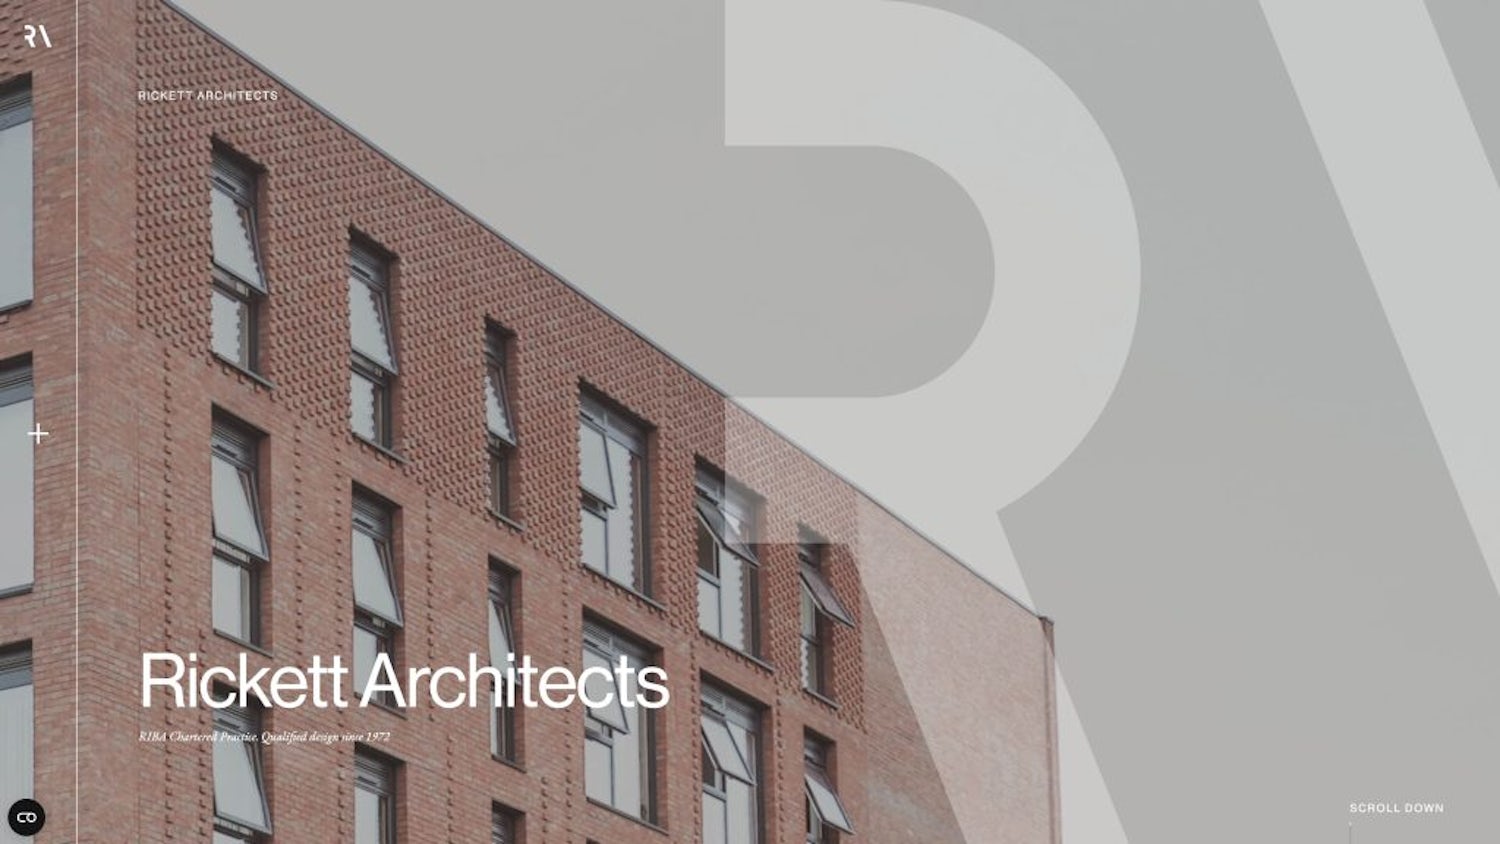 Rickett Architects home page